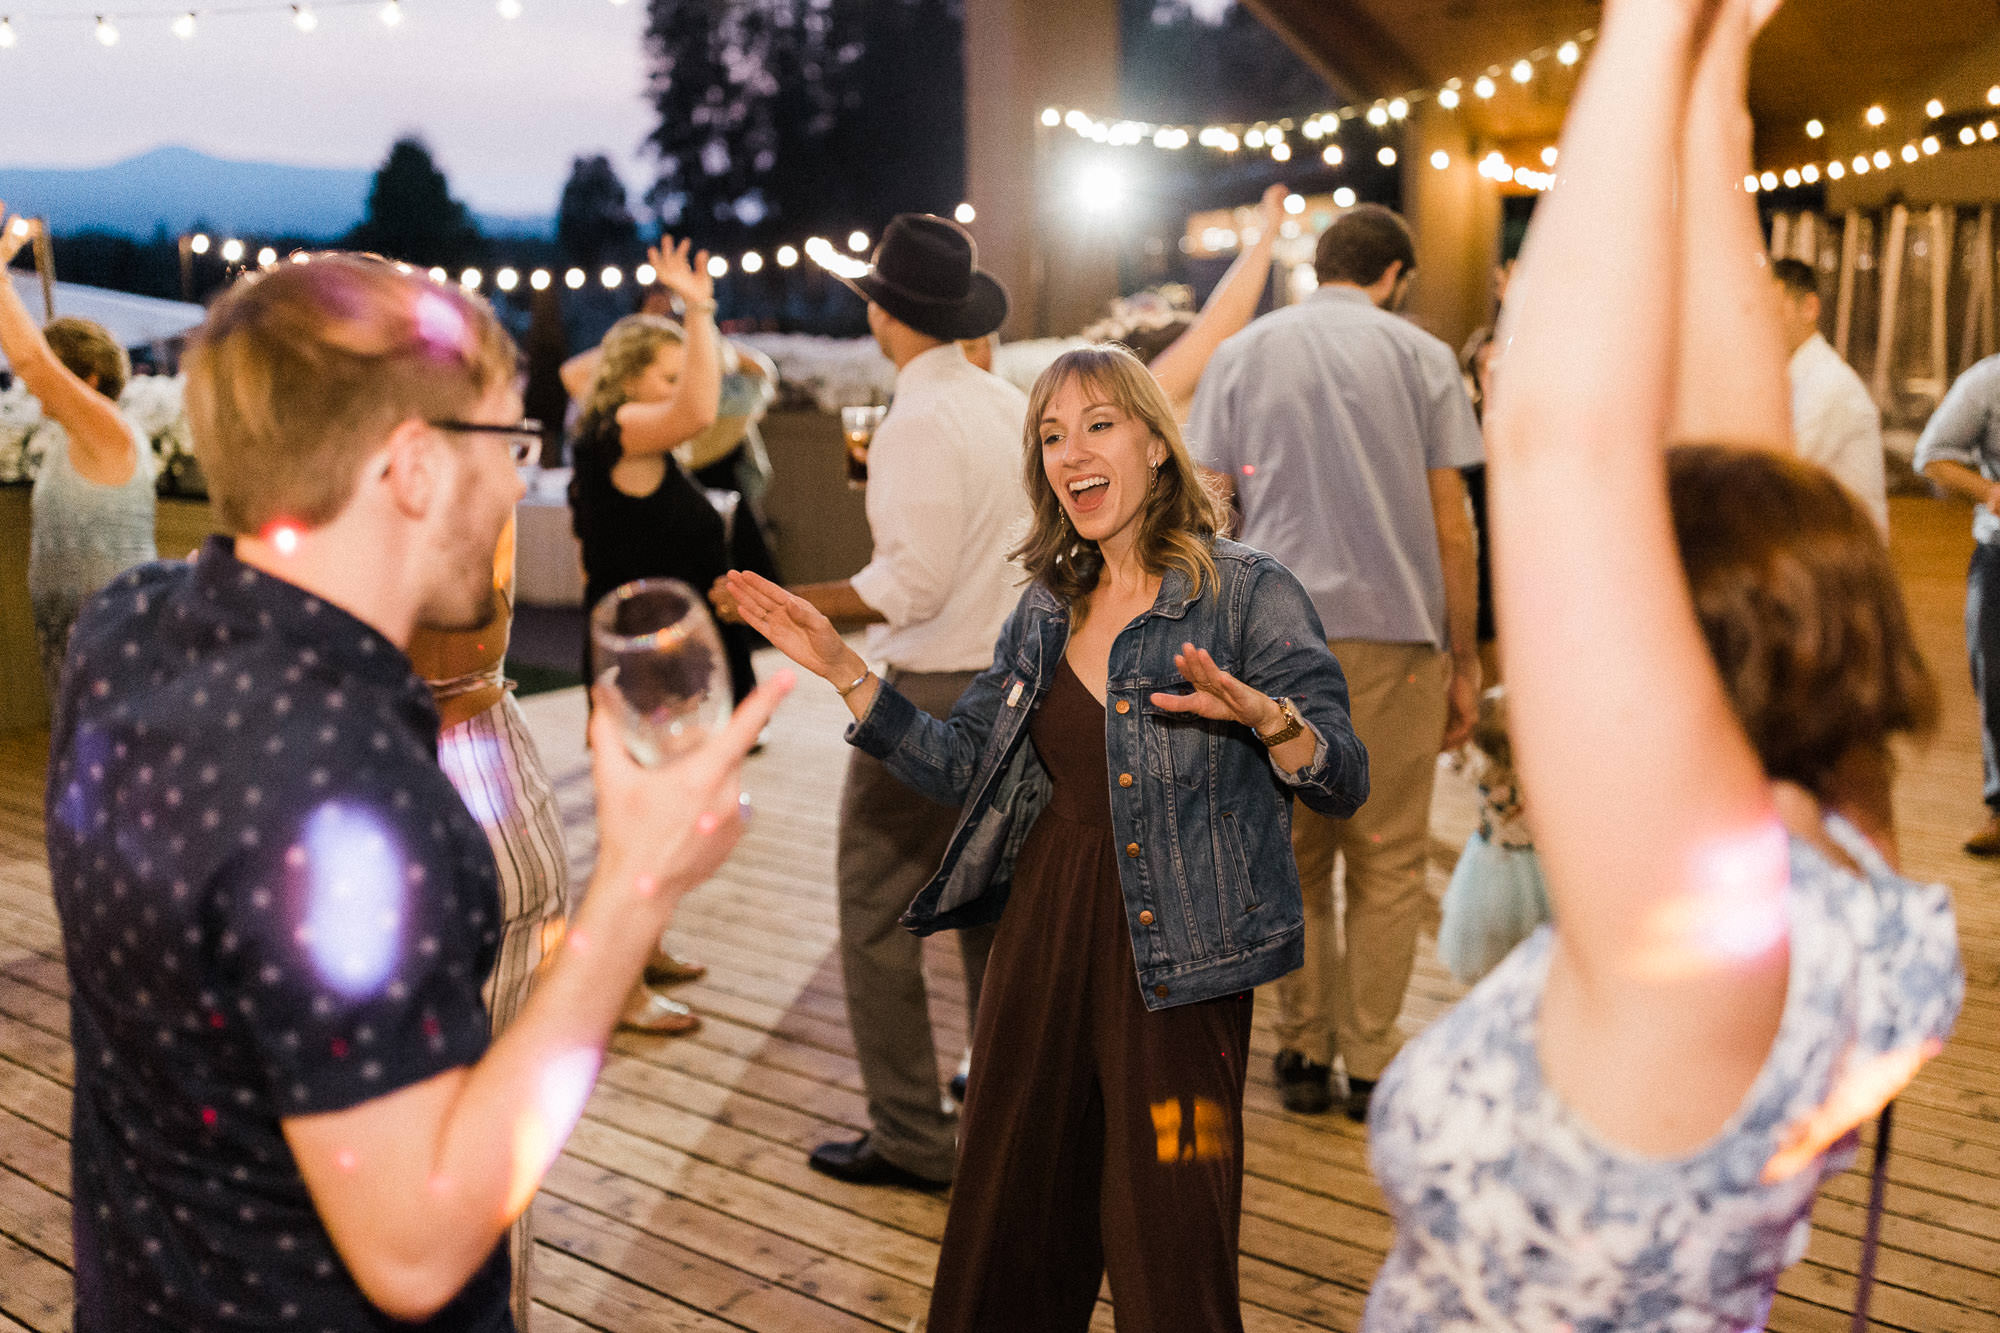 Guests dance at a wedding at Black Butte Ranch